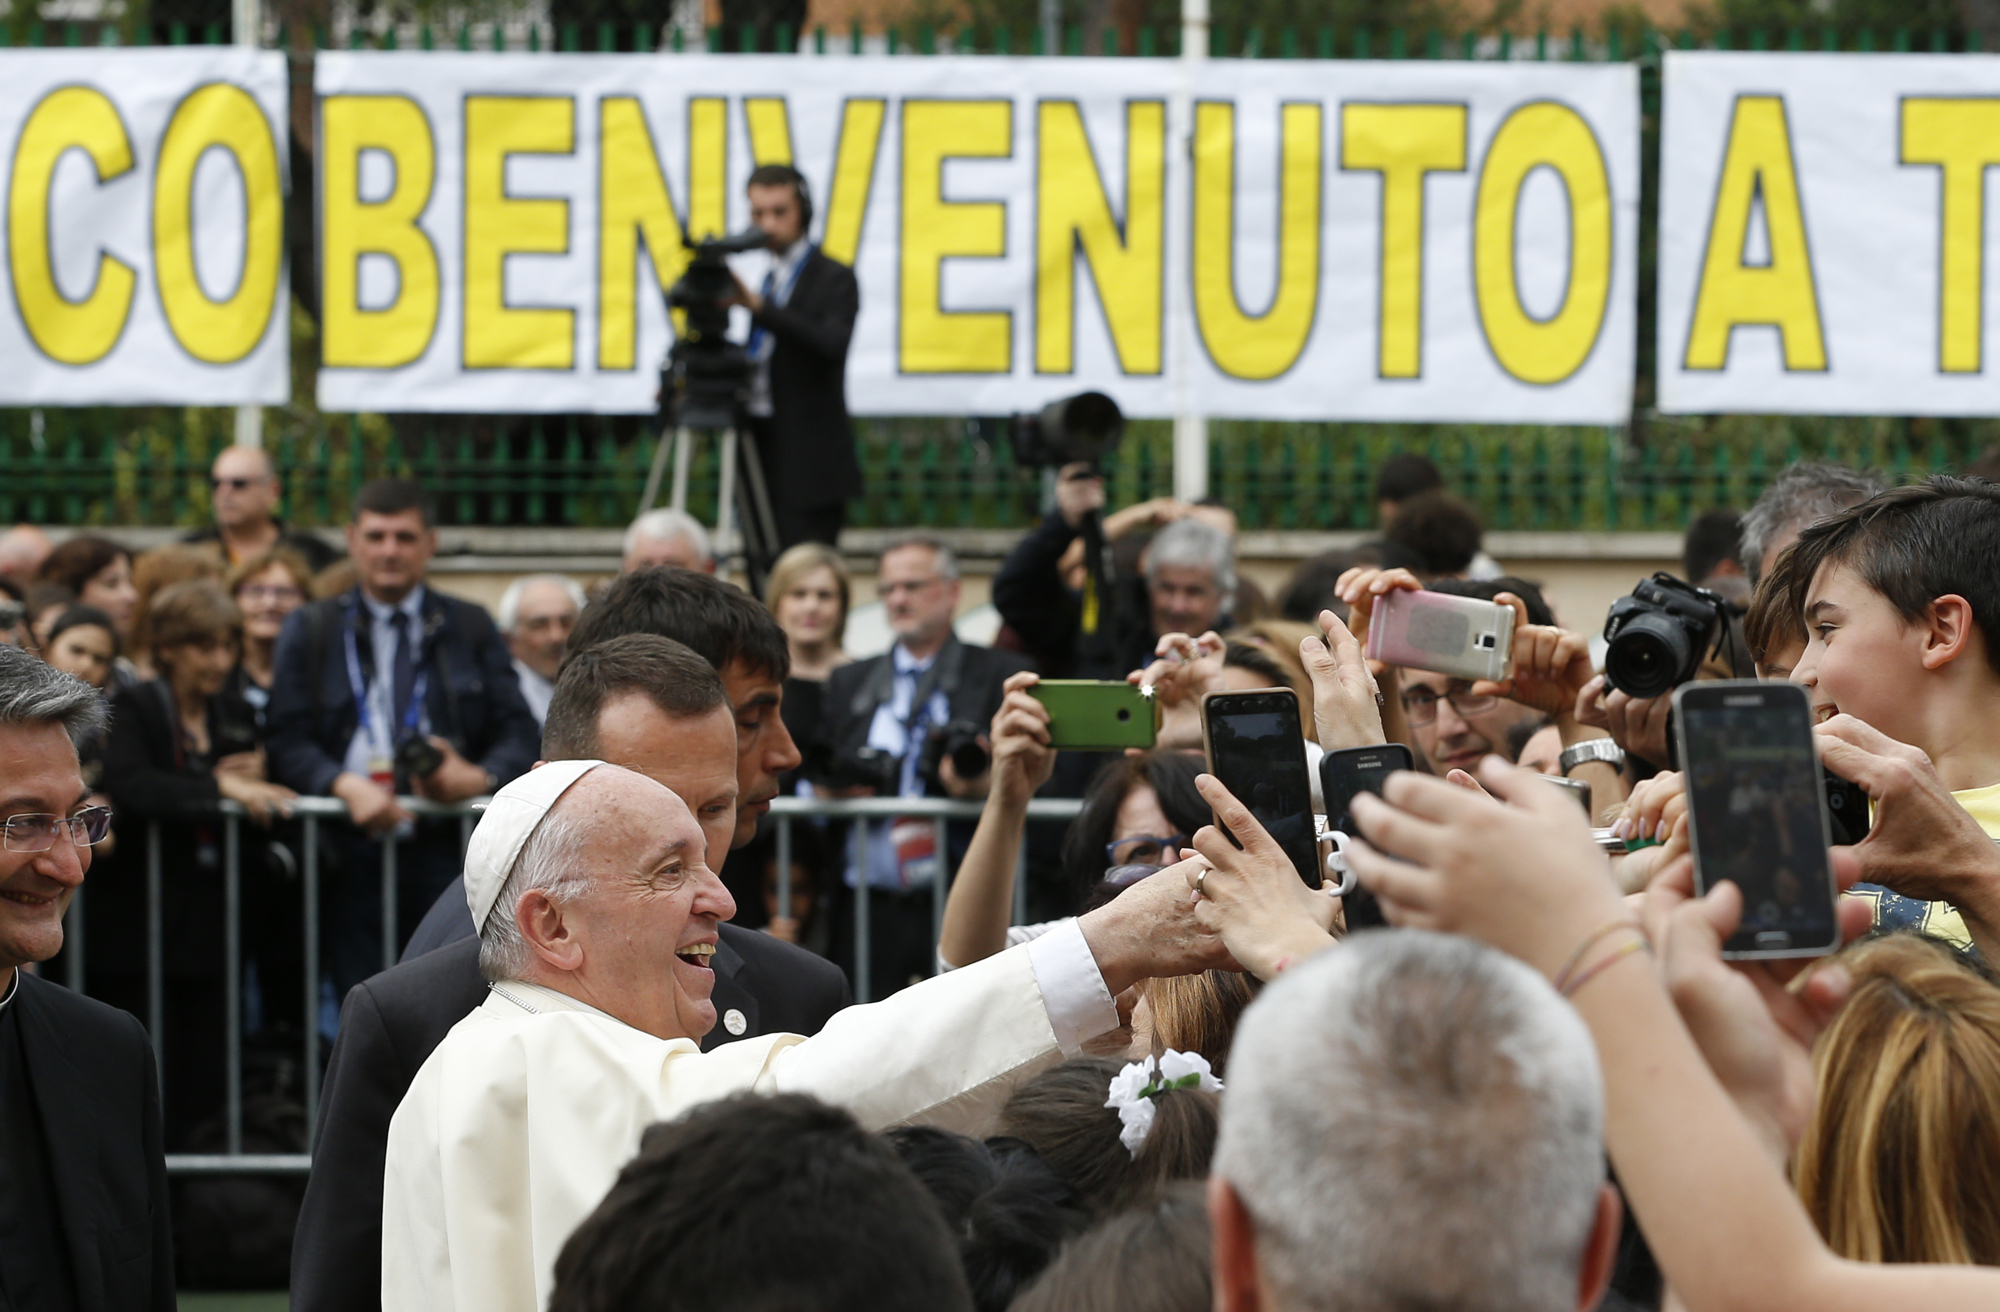 Love is constant caring for others, pope says at parish visit